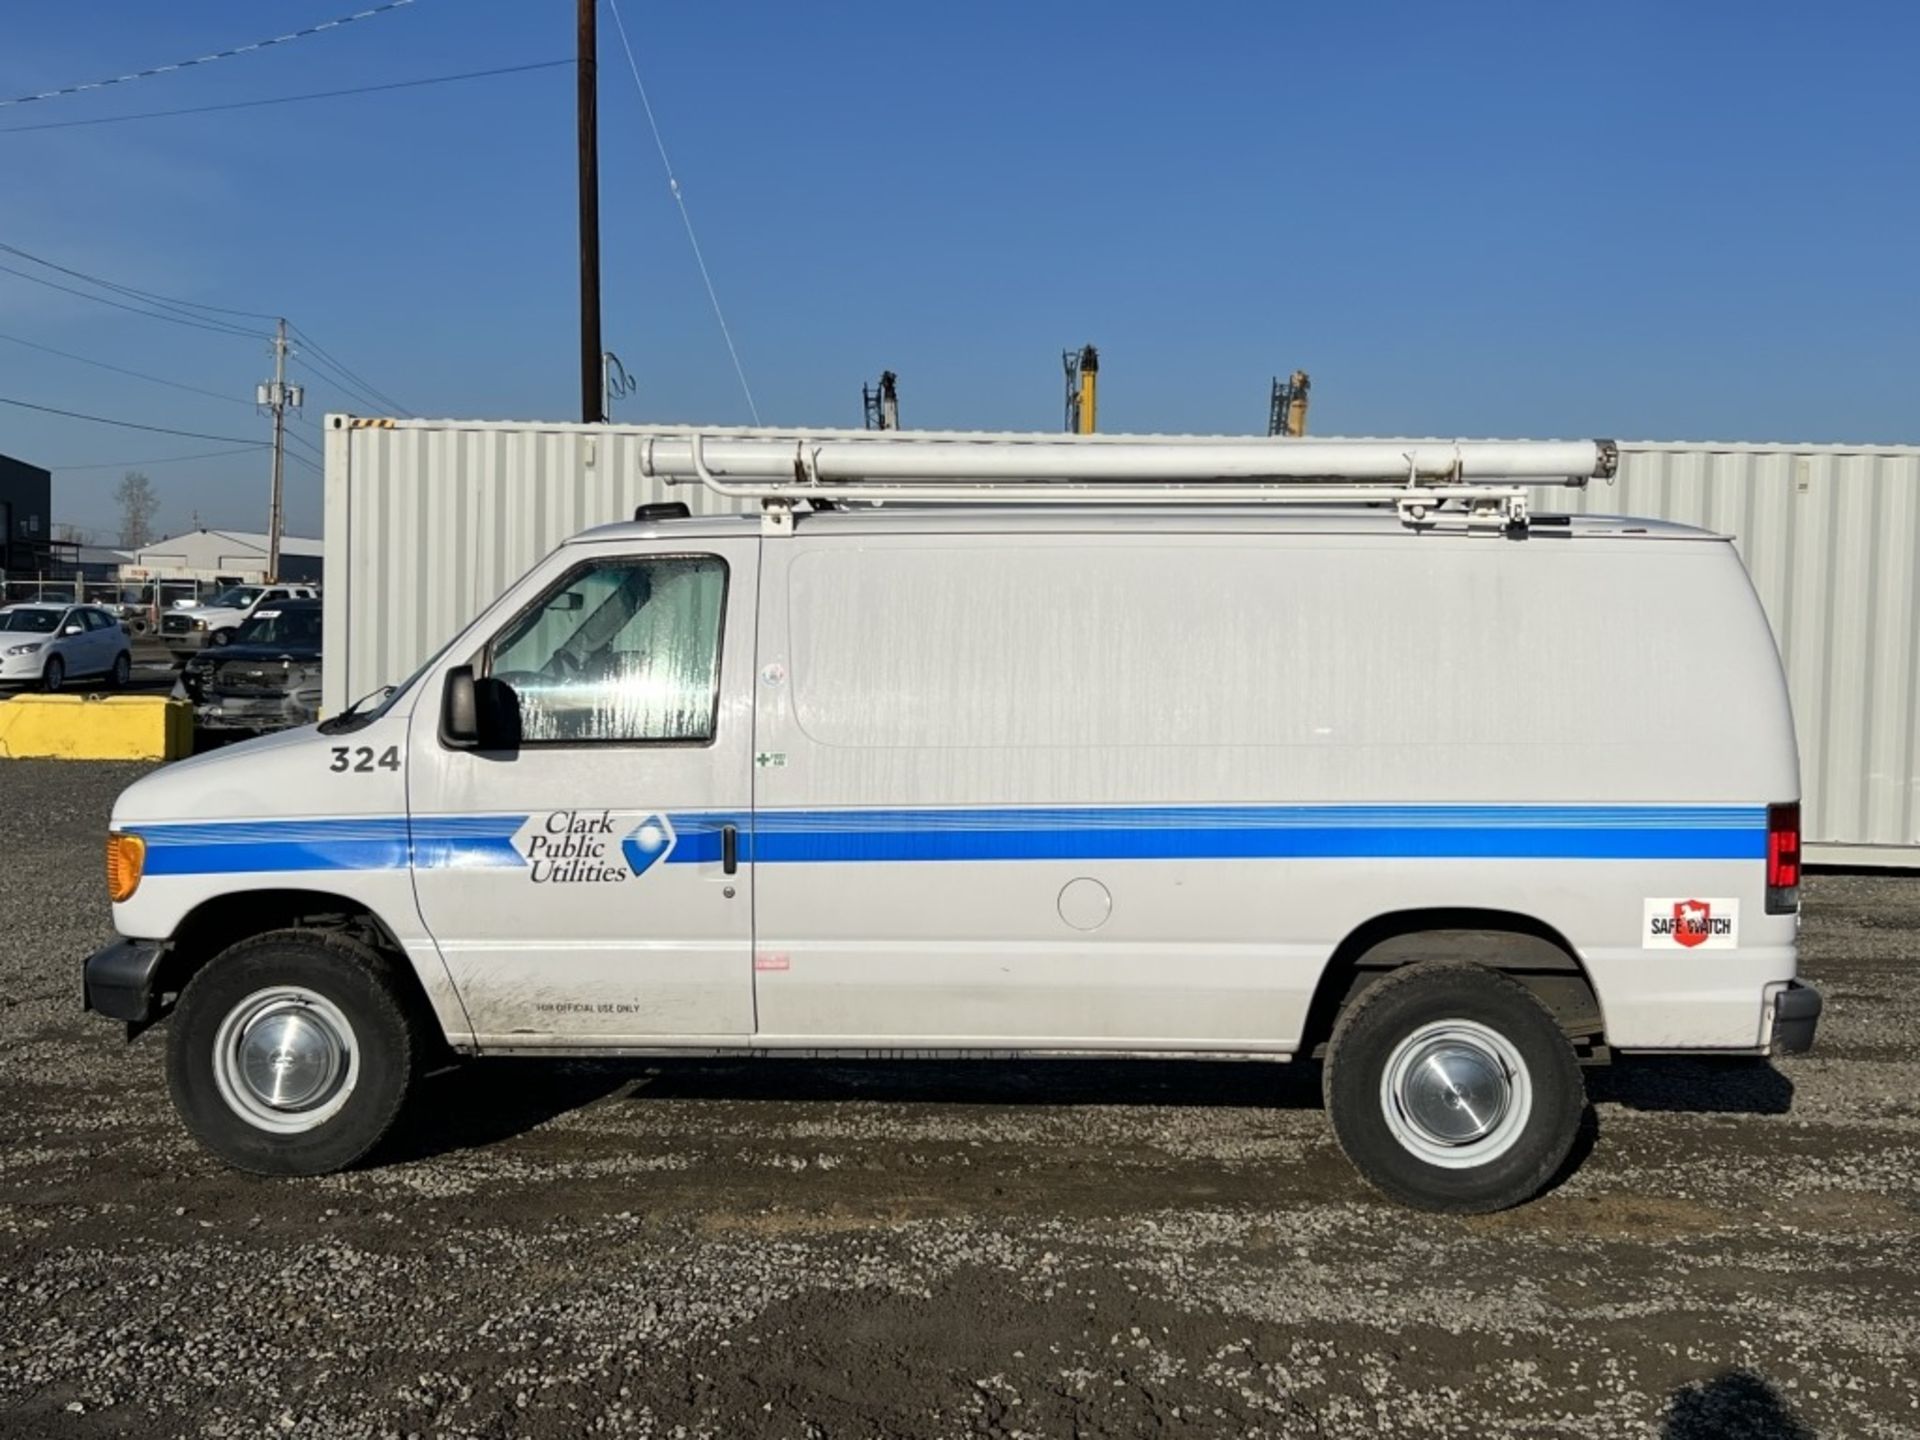 2004 Ford E350 SD Cargo Van - Image 7 of 29